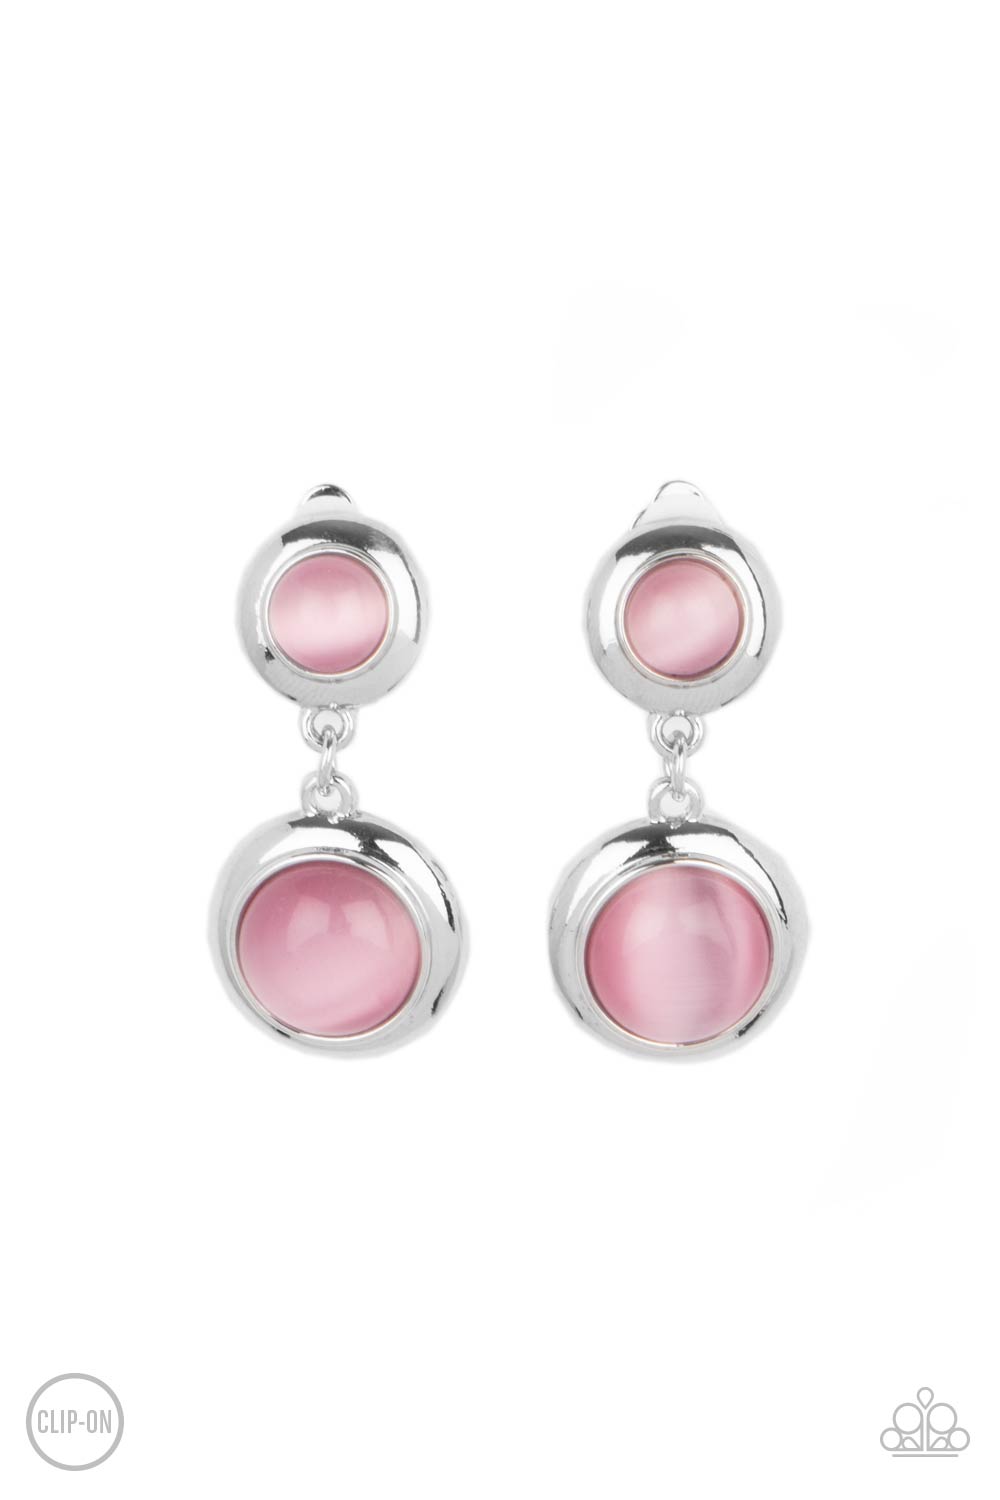 Subtle Smolder Pink Cat's Eye Stone Clip-on Earrings - Paparazzi Accessories- lightbox - CarasShop.com - $5 Jewelry by Cara Jewels